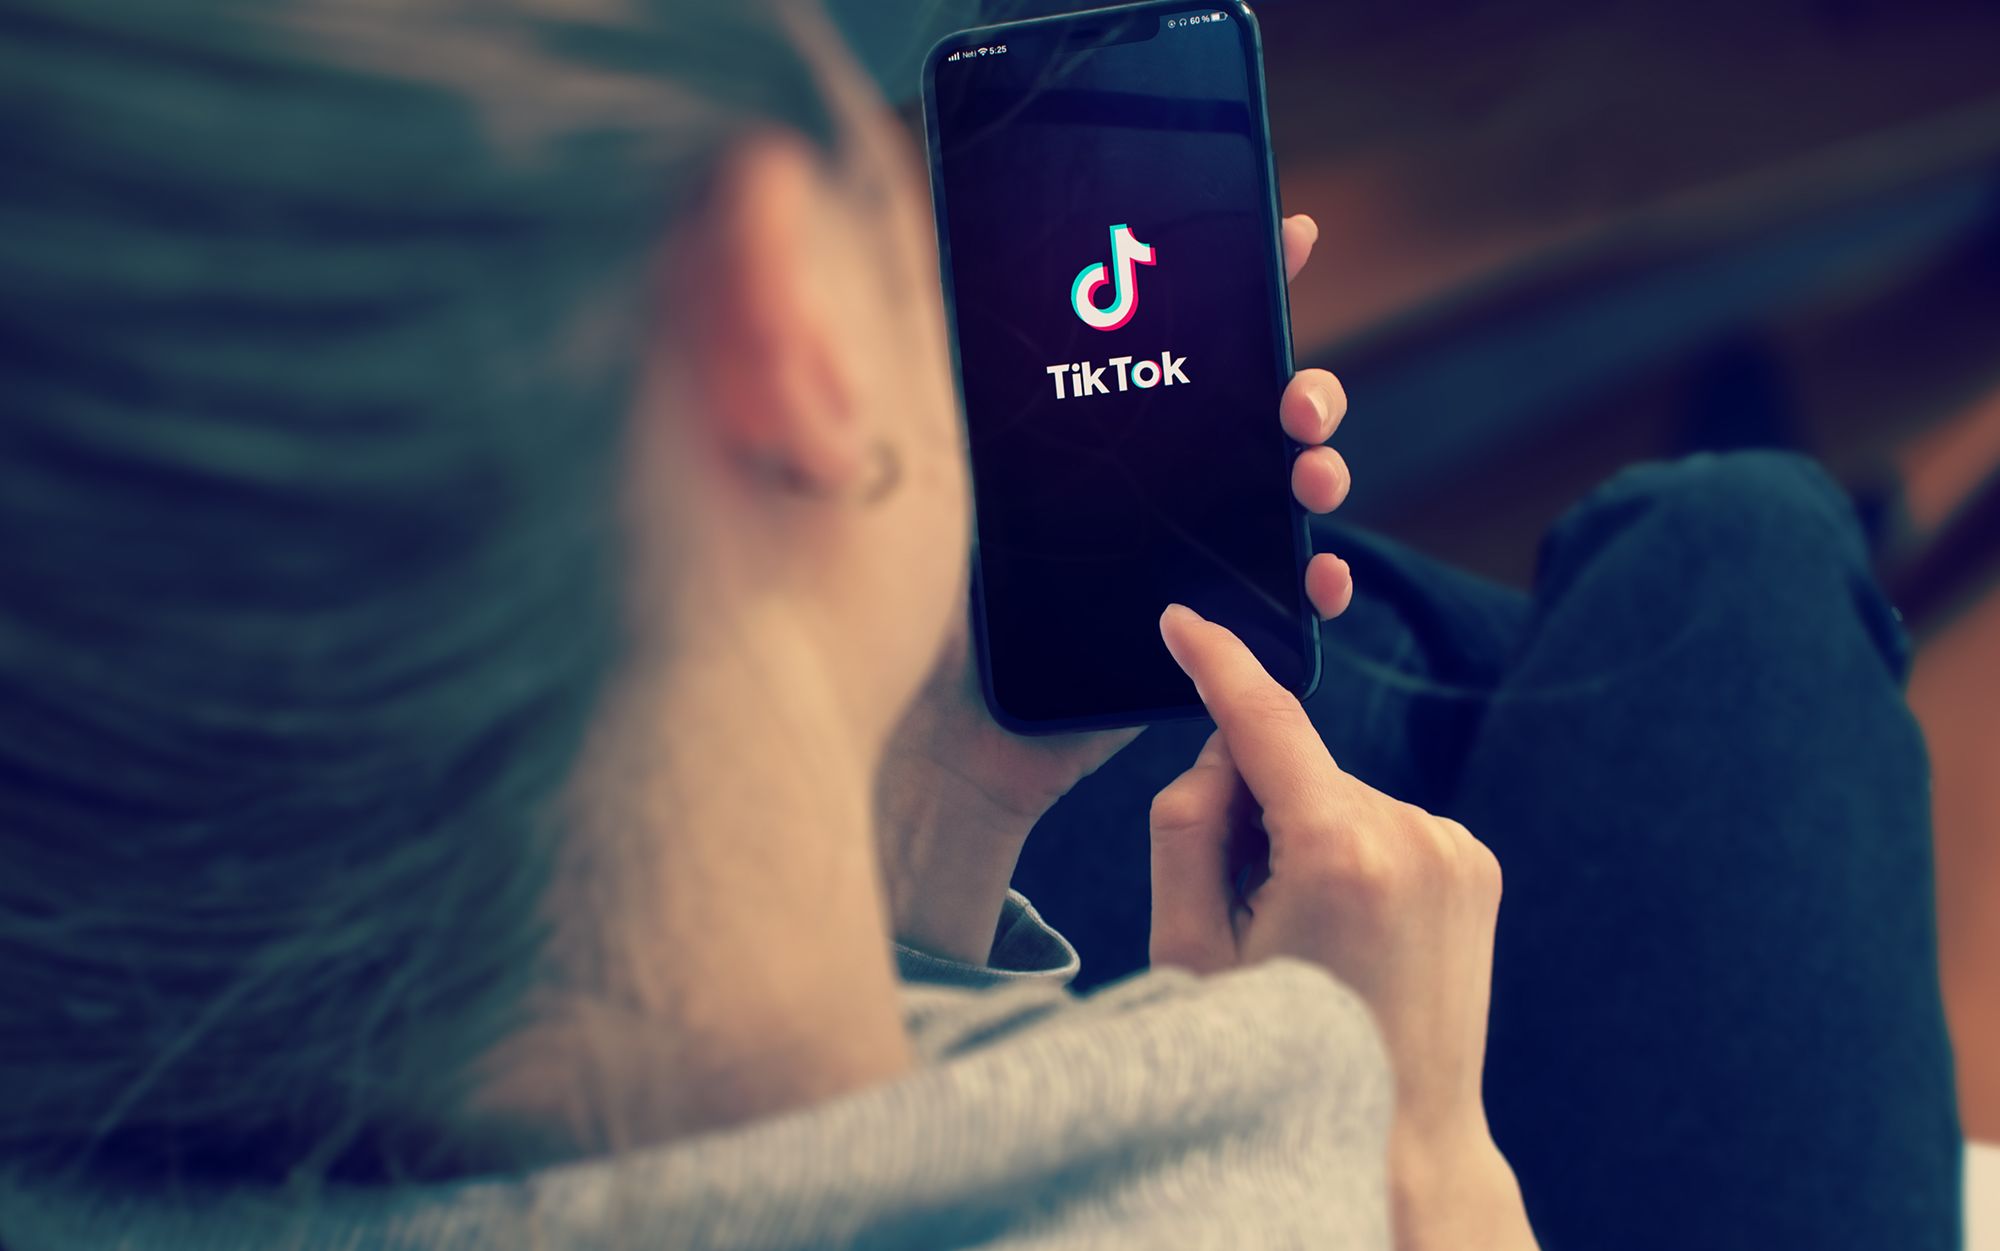 tiktok: TikTok users can earn $100 per hour to watch short-video app for 10  hours. Check last date to apply - The Economic Times